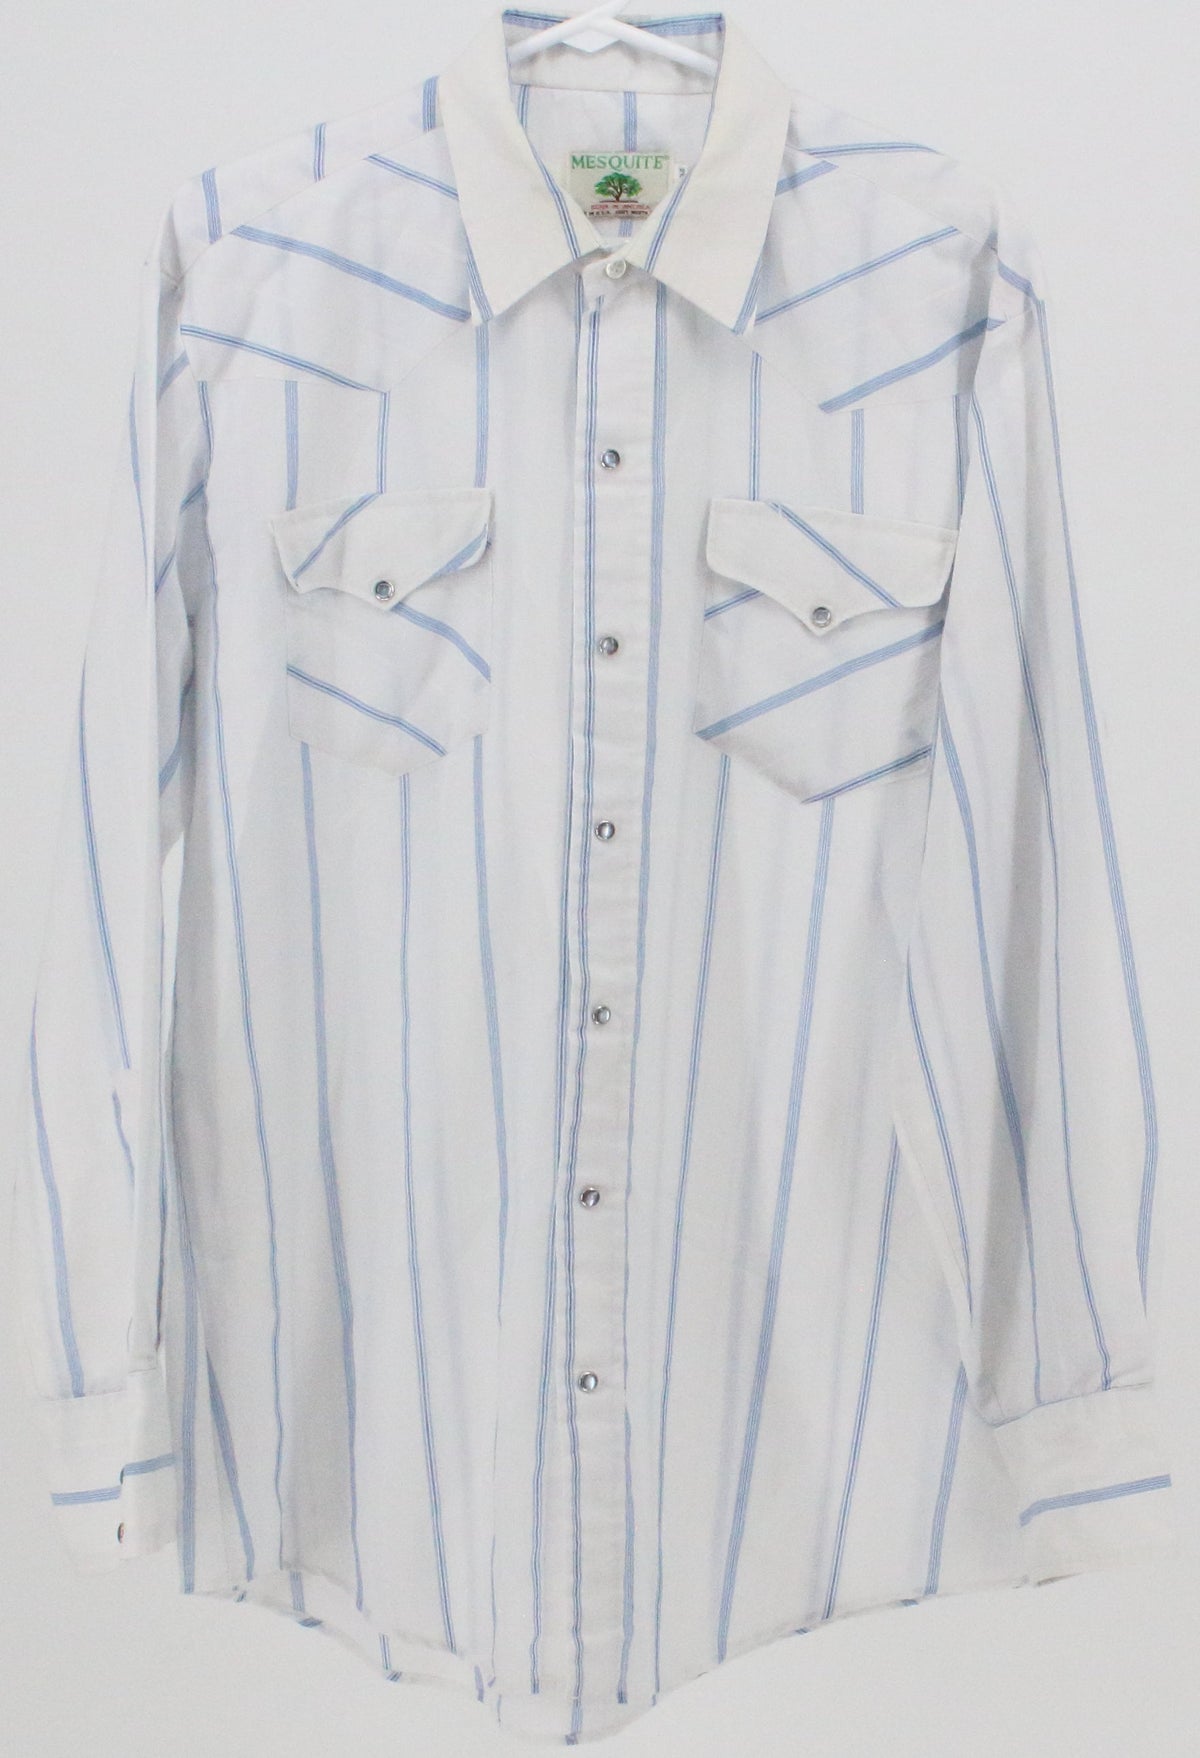 Mesquite White and Blue Striped Shirt